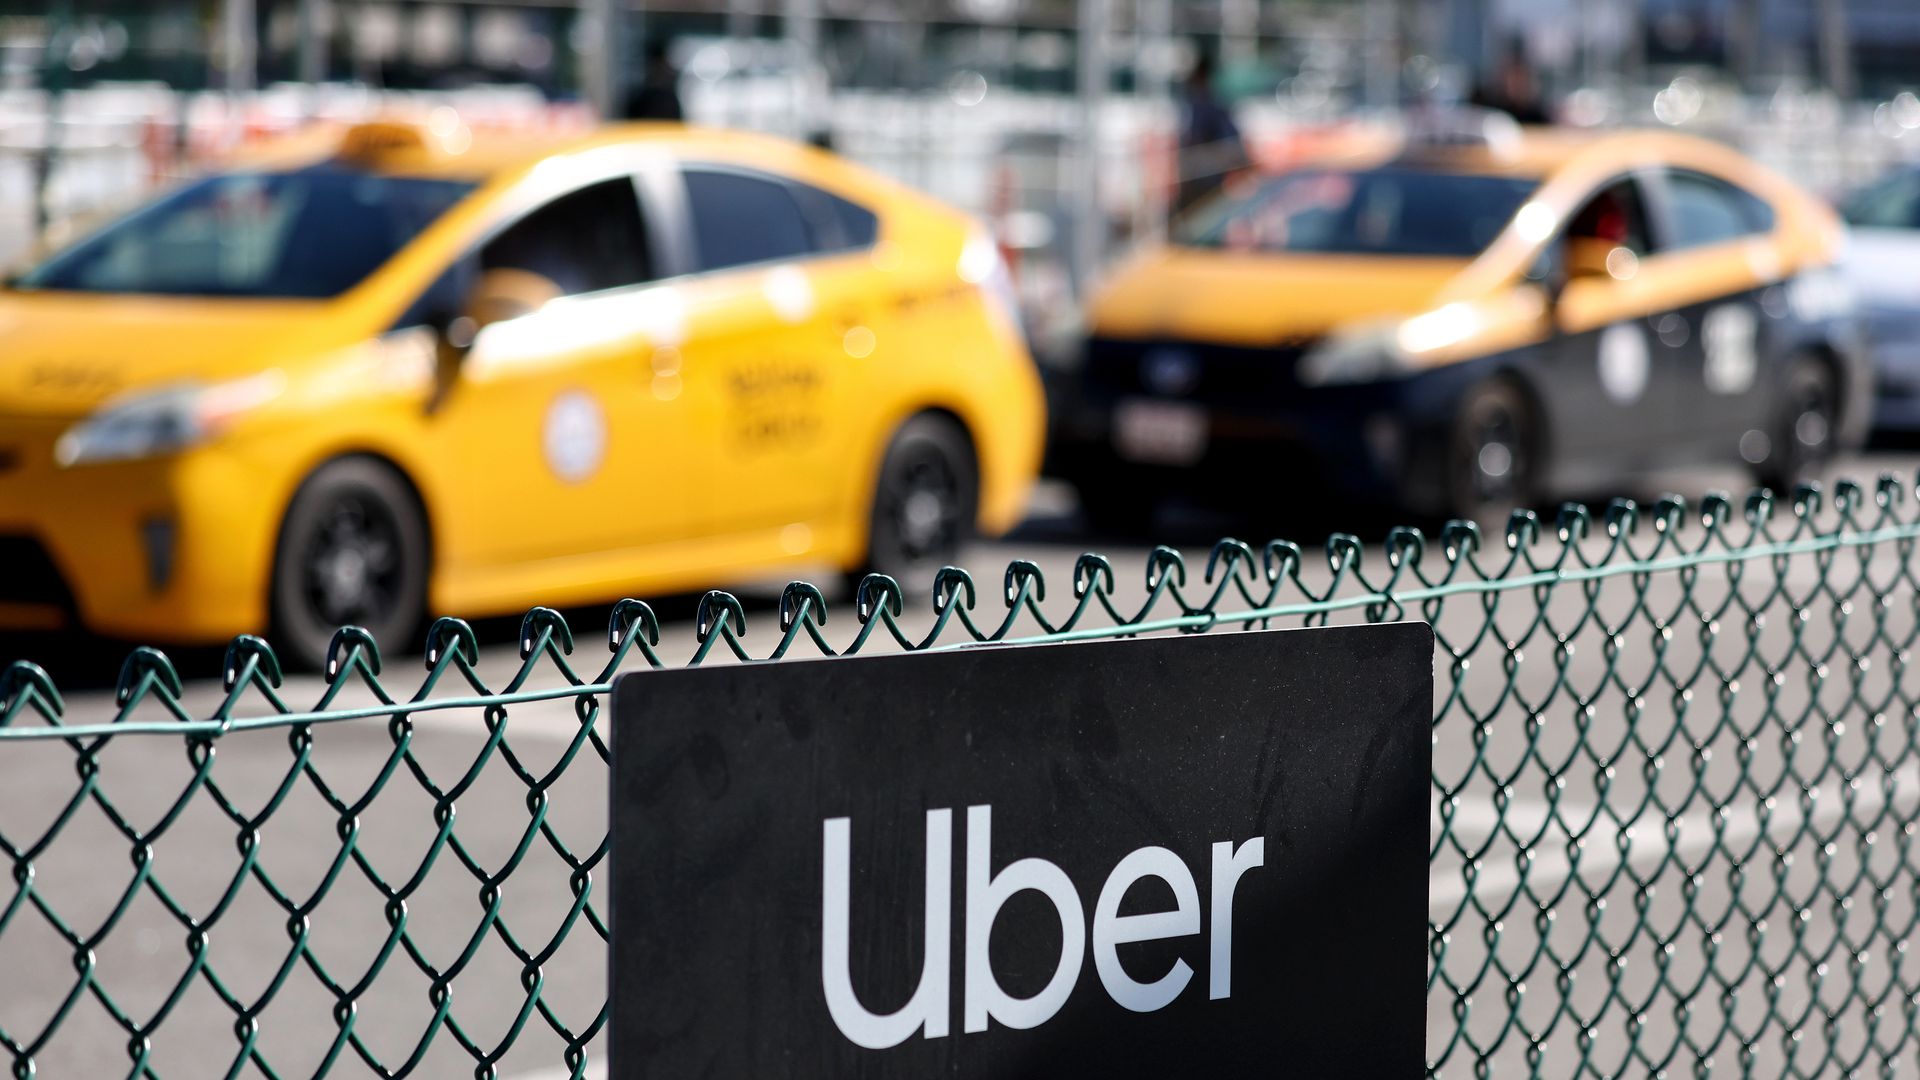  An Uber rideshare sign is posted on a fence as taxis wait in the background. 